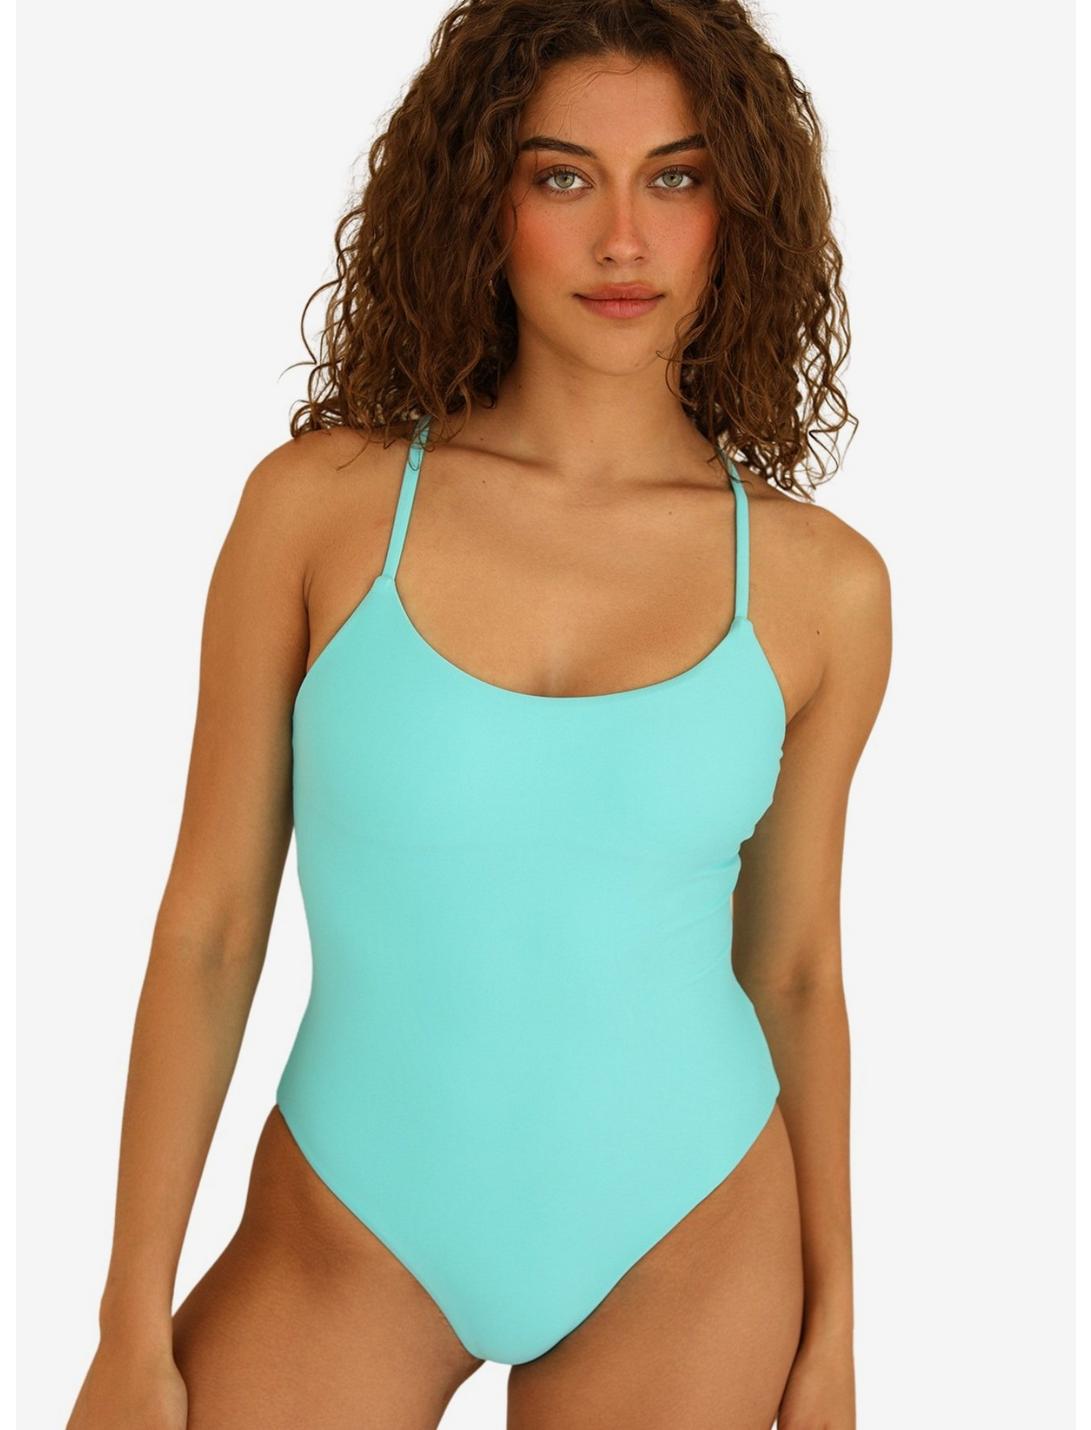 Dippin' Daisy's Star One Piece Blue Crush, BLUE, hi-res